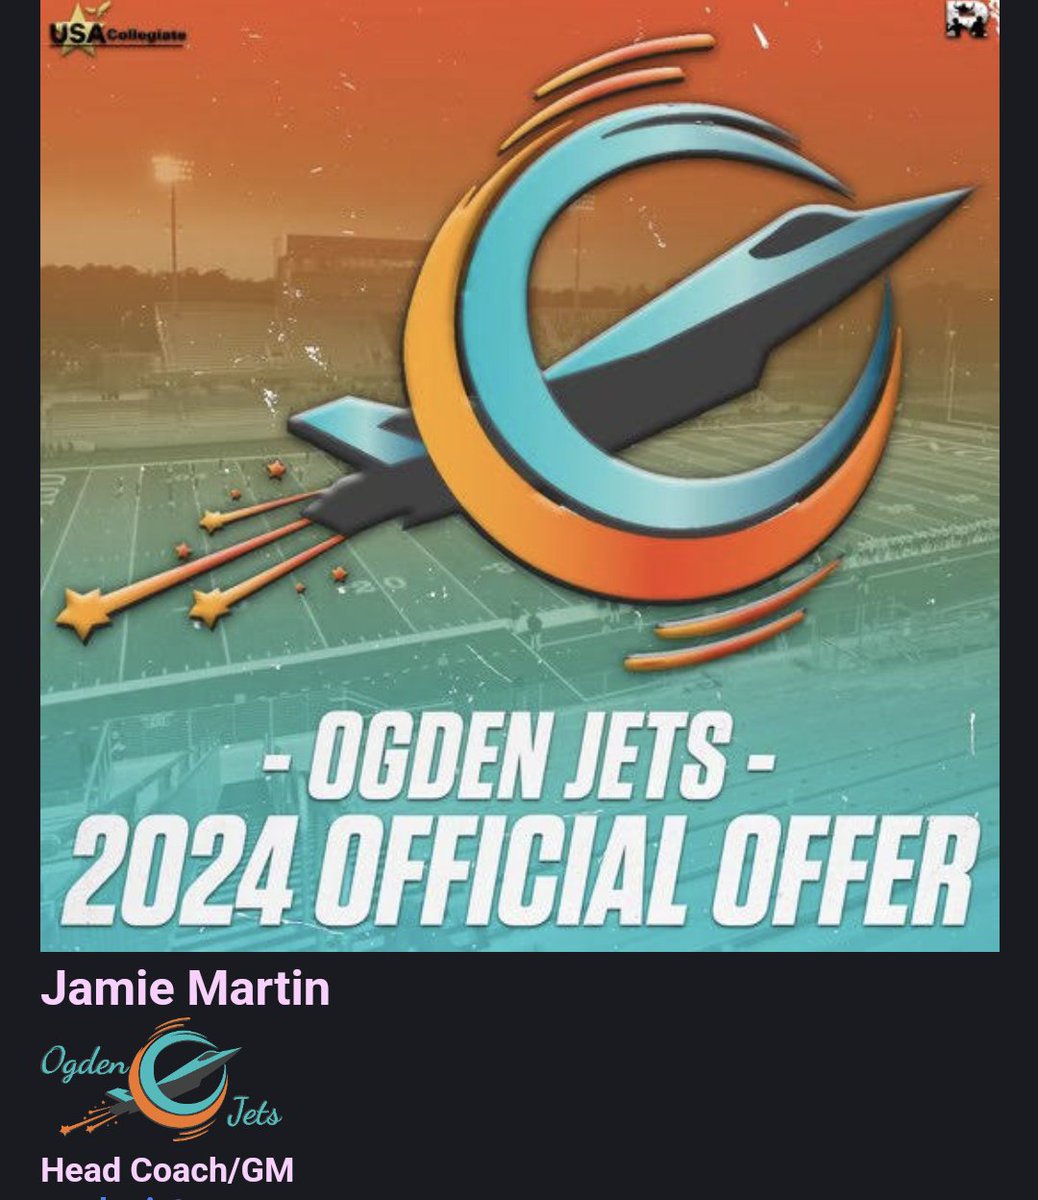 AG2G! Blessed to have received an offer from The Ogen Jets! Thank you Coach Martin & Coach Hunt-Loveless for believing in me and giving me an opportunity to play at the next level! @provo_football @OgdenJets @CoachVili @kirk67chambers @kanuch78 @jayFITA51 @joe_tuha @VictorUnga